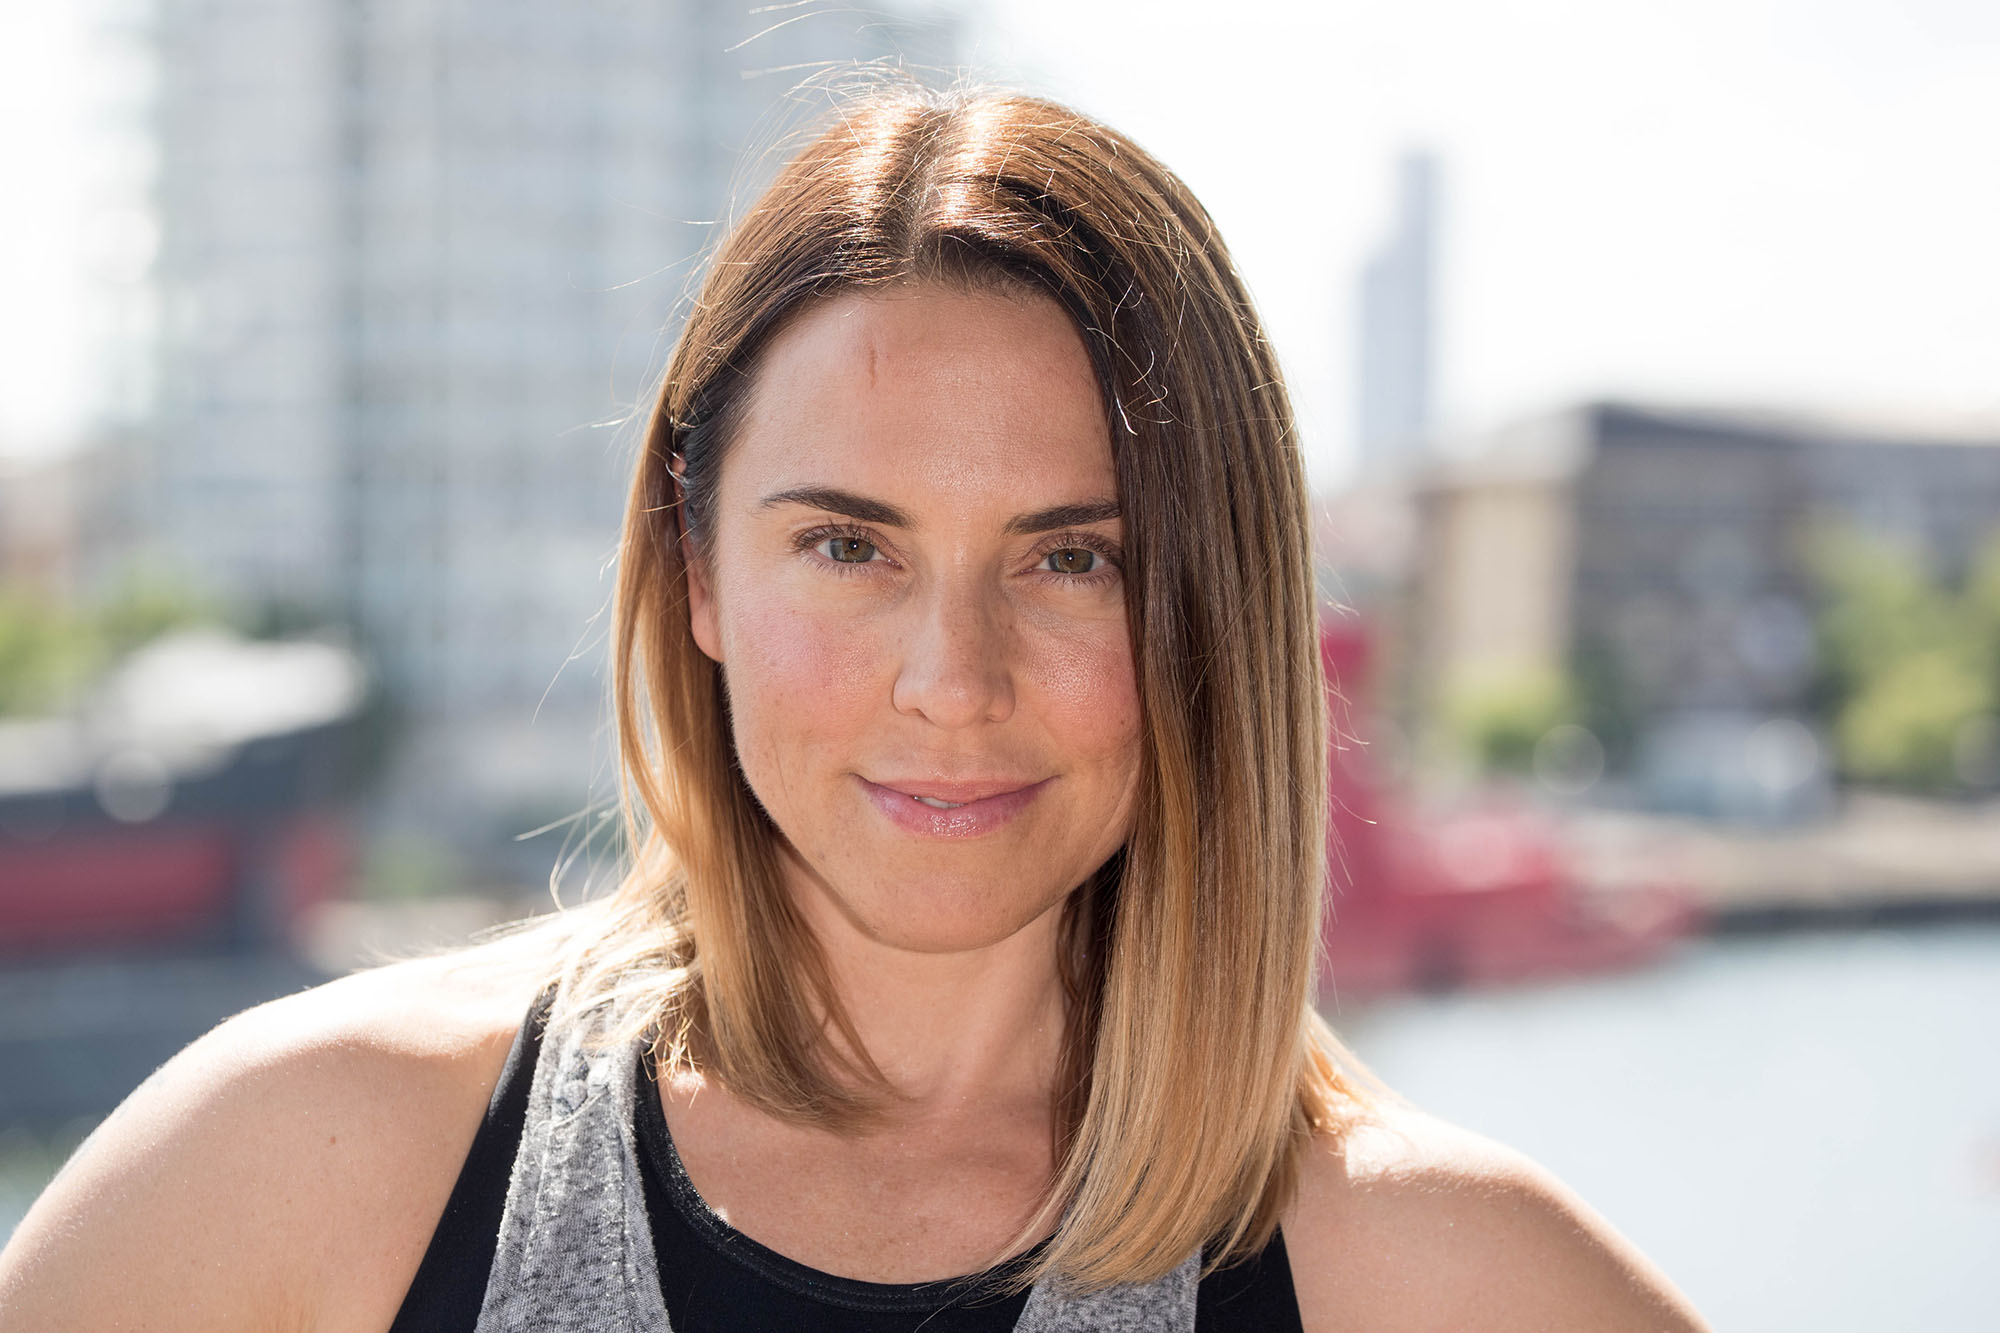 Mel C attends for a Photocall before The London Triathlon at ExCel on August 6, 2016 in London, England. (Photo by Luca Teuchmann/Getty Images) (Luca Teuchmann&mdash;Luca Teuchmann / Getty Images)